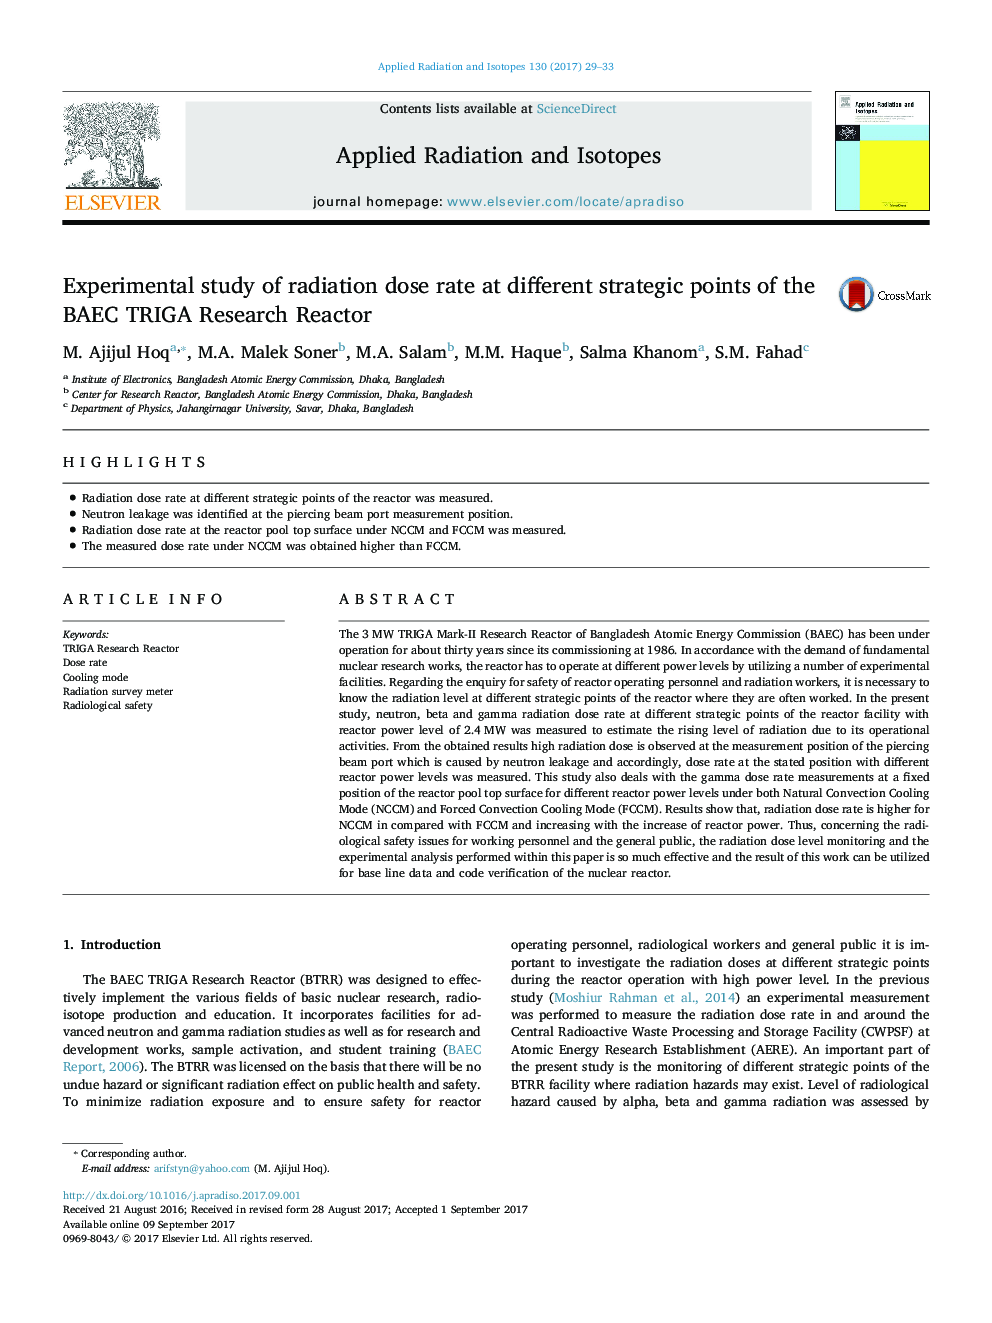 Experimental study of radiation dose rate at different strategic points of the BAEC TRIGA Research Reactor